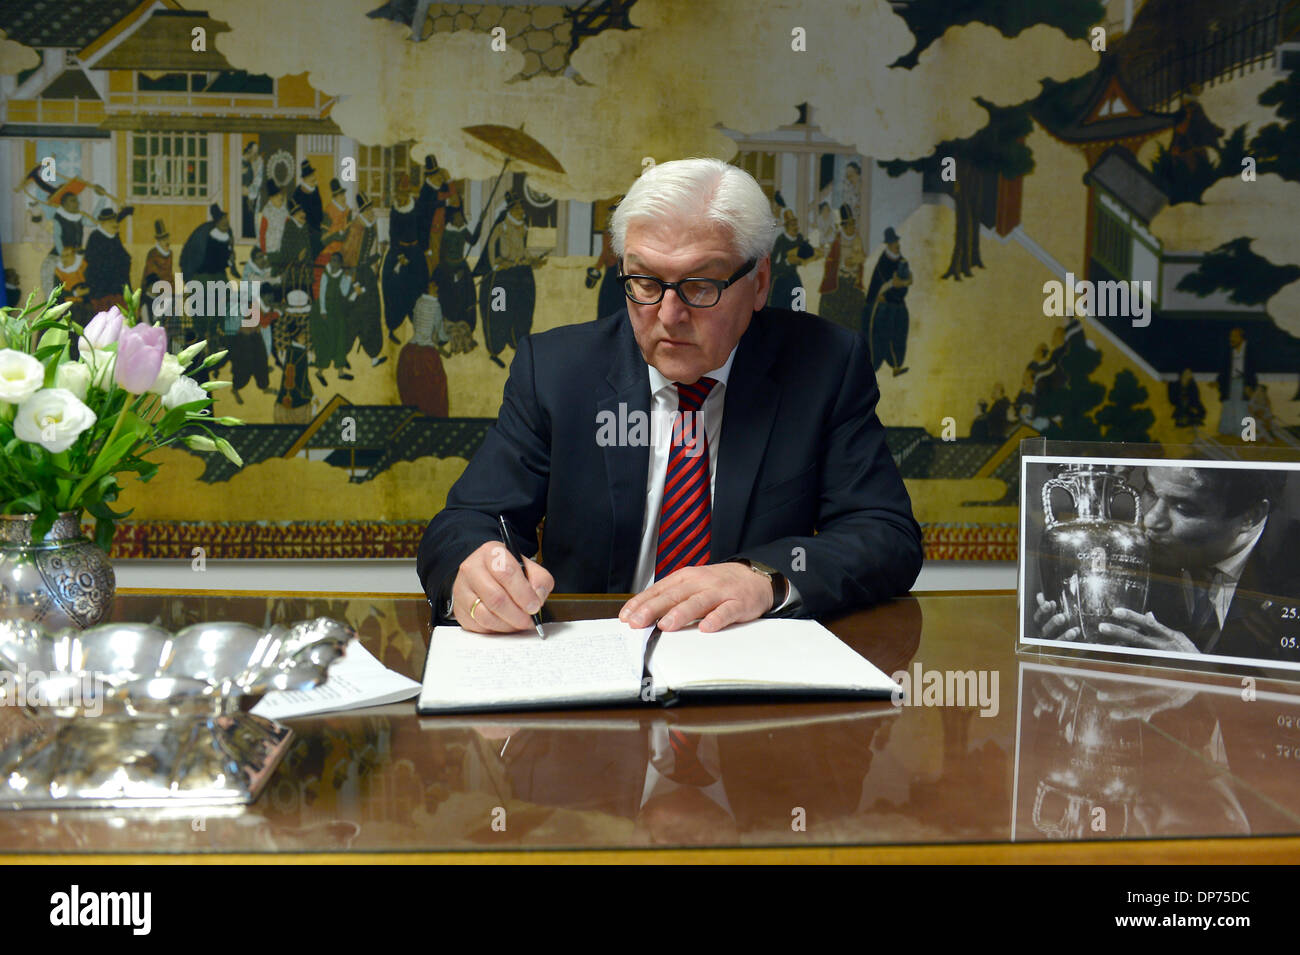 Berlin, Germany. January 8th 2014. Federal Minister for Foreign Affairs Frank-Walter Steinmeier (SPD) signs the condolence book in memory of the Portuguese football player Eusébio (aka Black Panther) in the Portuguese Embassy in Berlin. Goncalo Silva/Alamy Live News. Stock Photo